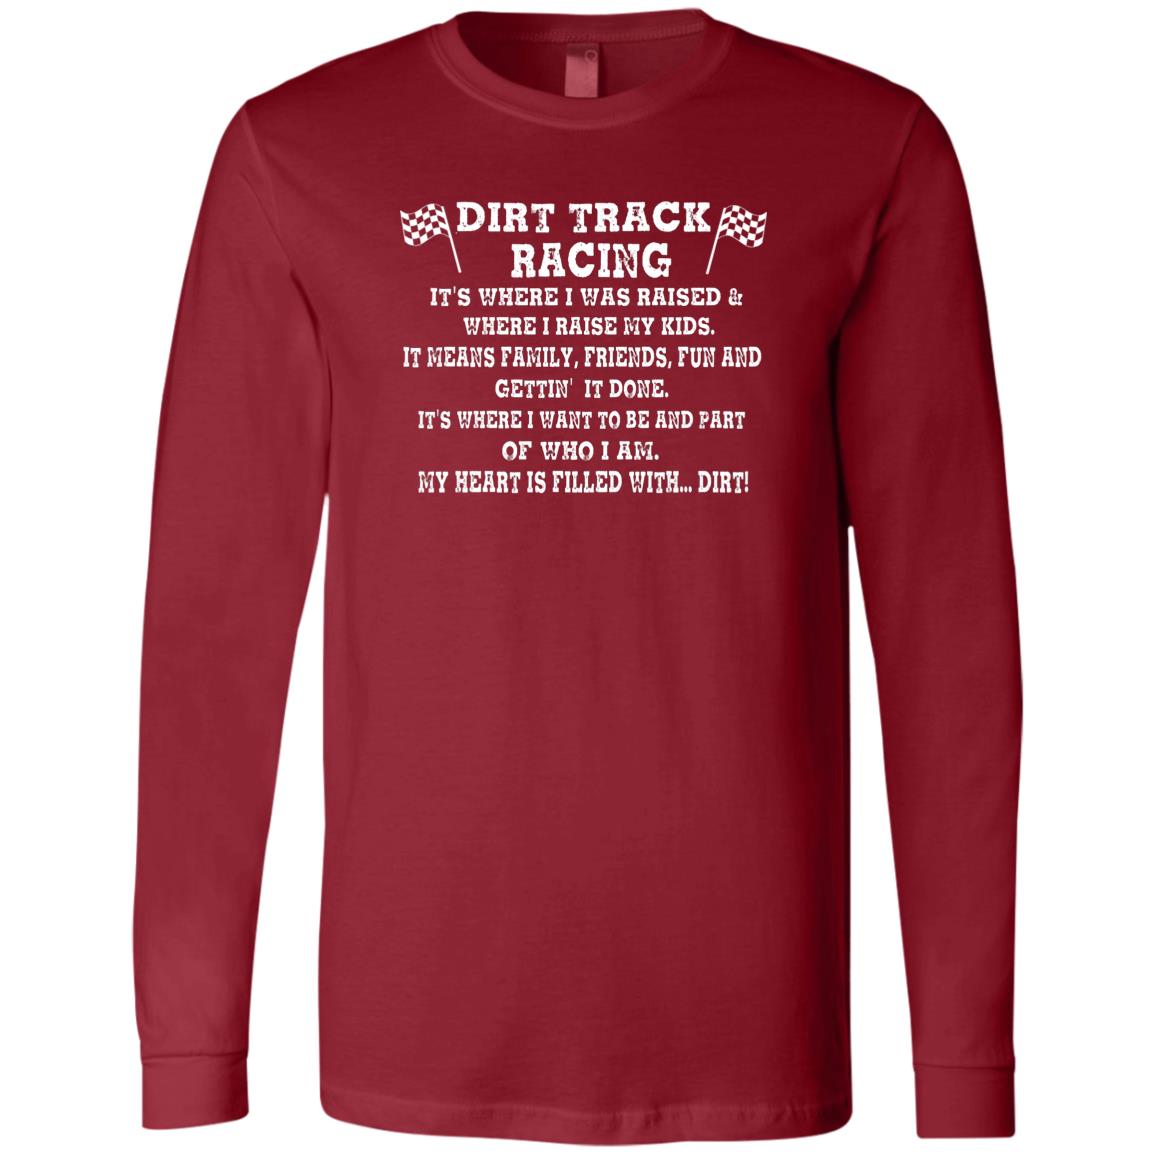 Dirt Track Racing It's Where I Was Raised Men's Jersey LS T-Shirt